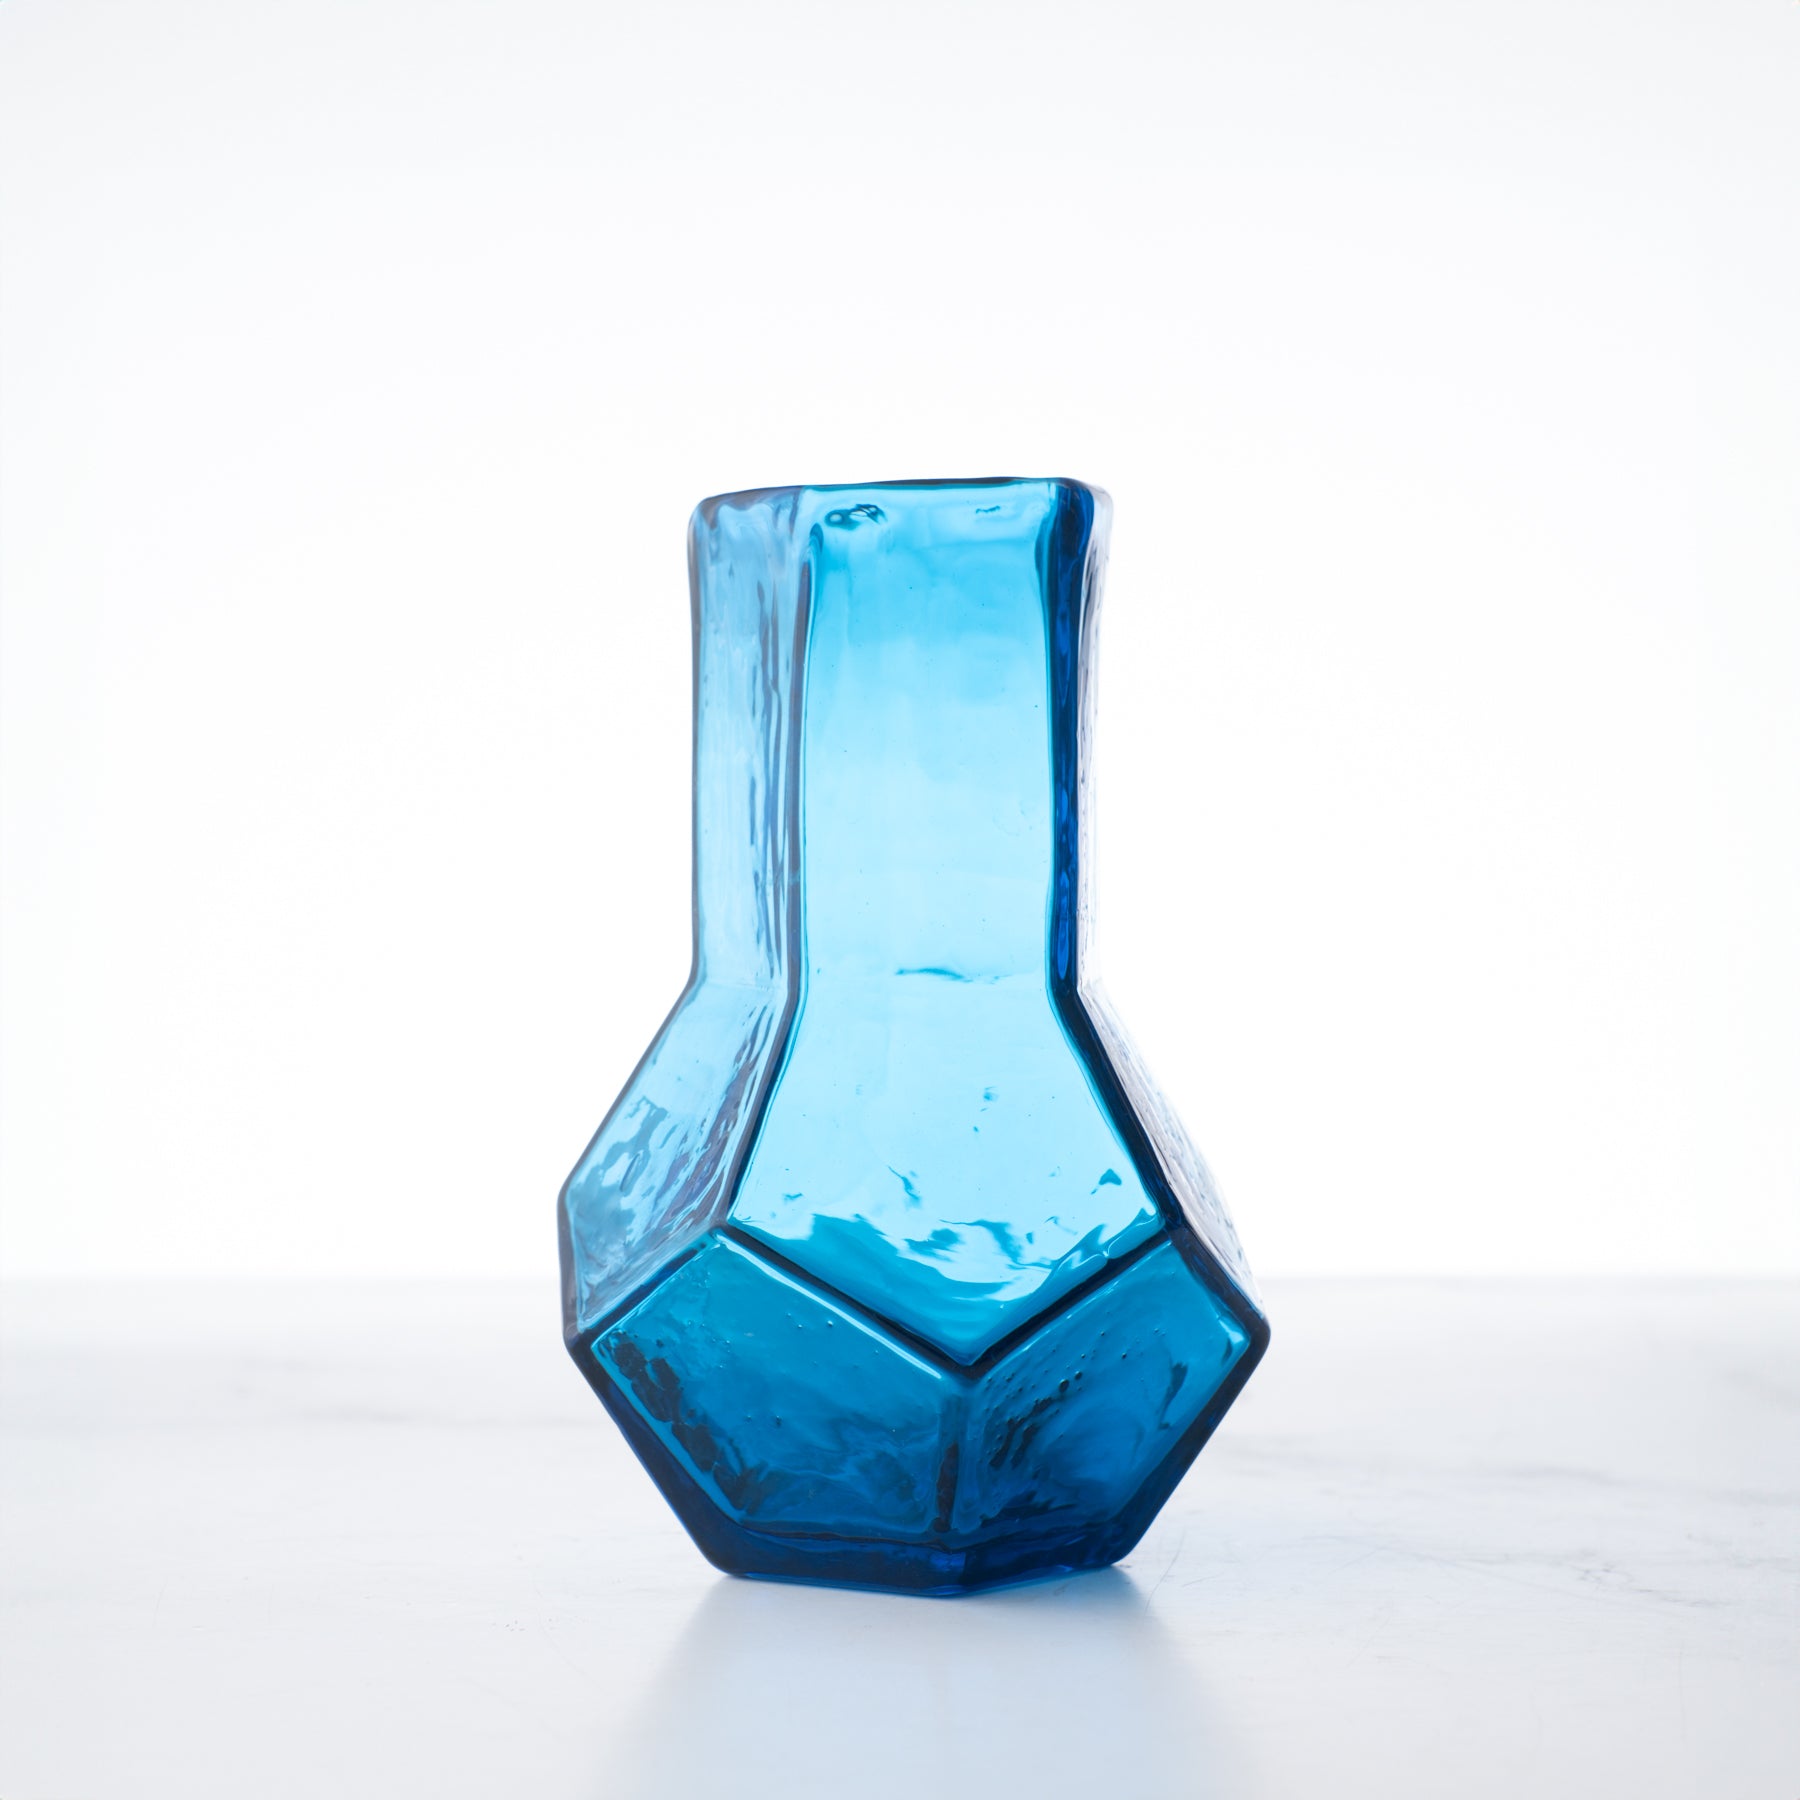 2411 D12 Dice Tower Bud Vase - Turquoise